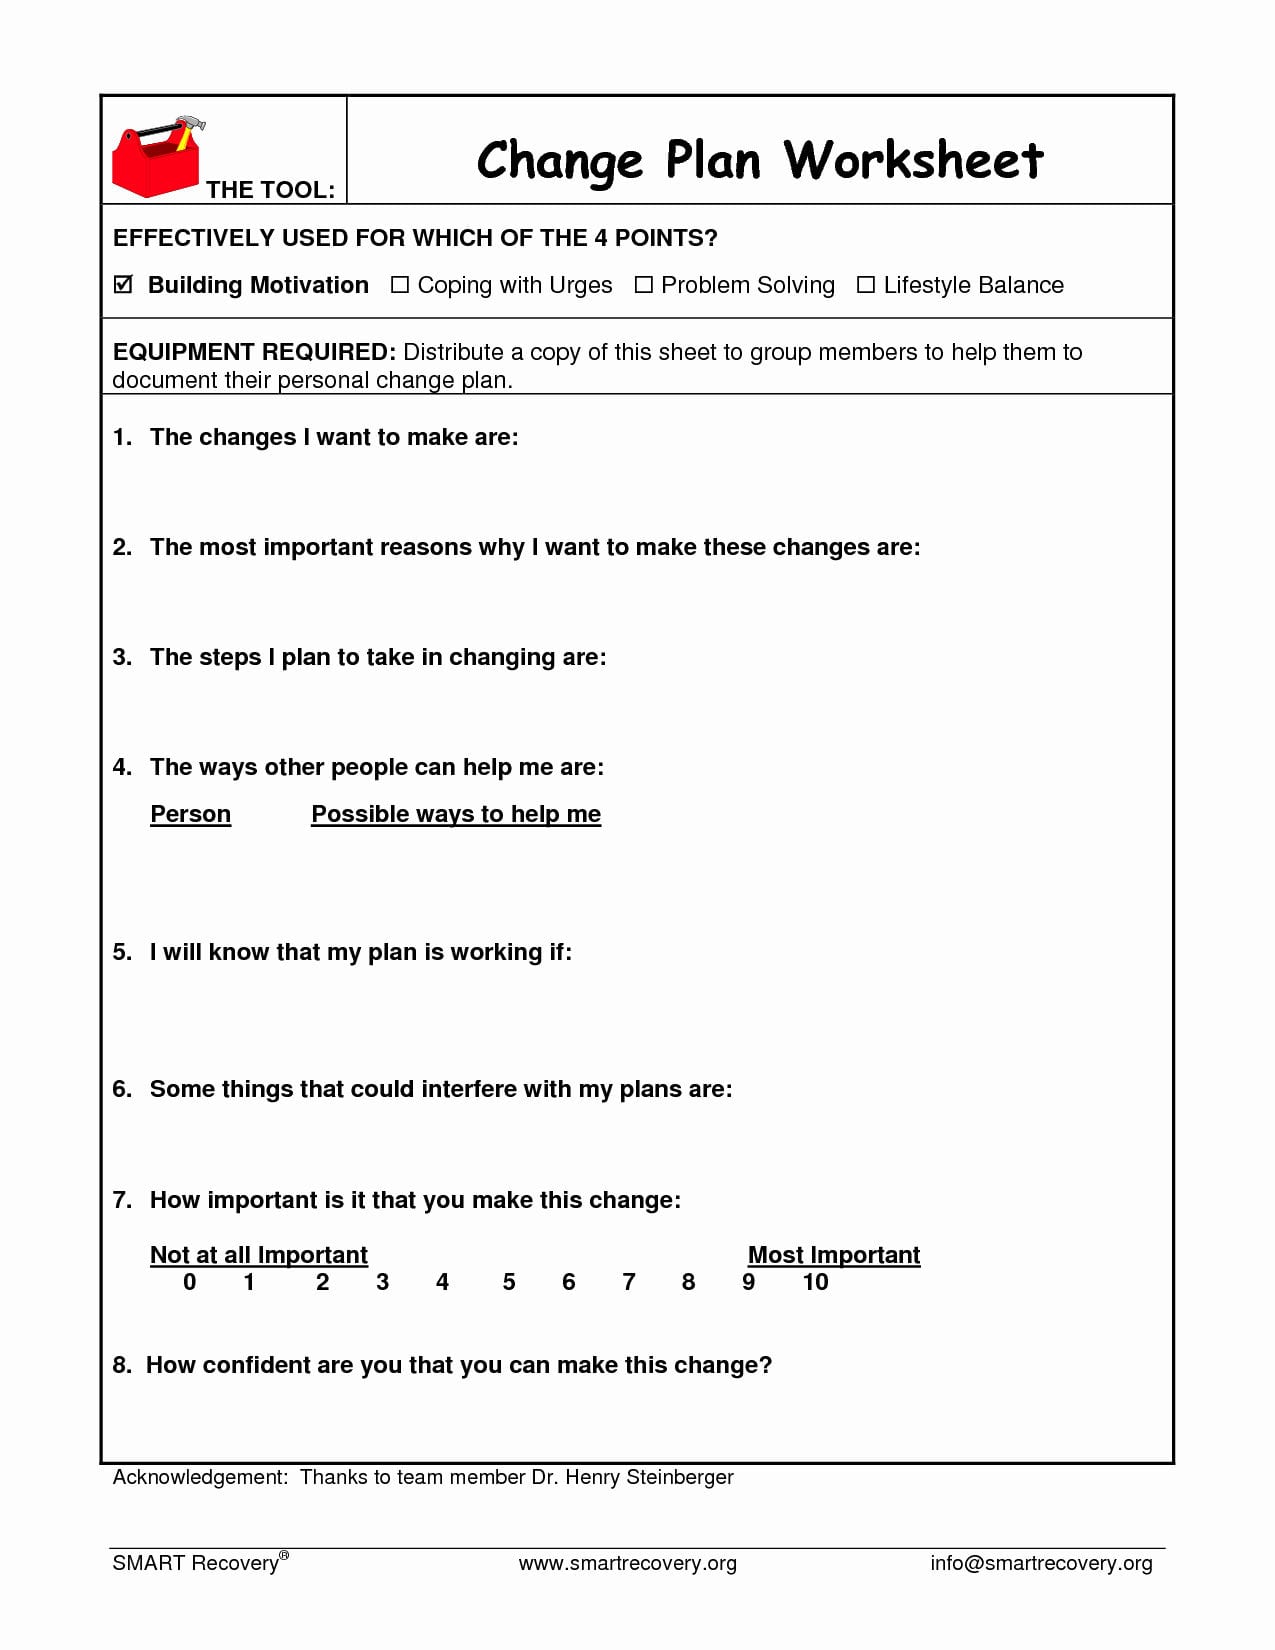 Life Skills Worksheets For Recovering Addicts Lovely 17 Best For Life Skills Worksheets